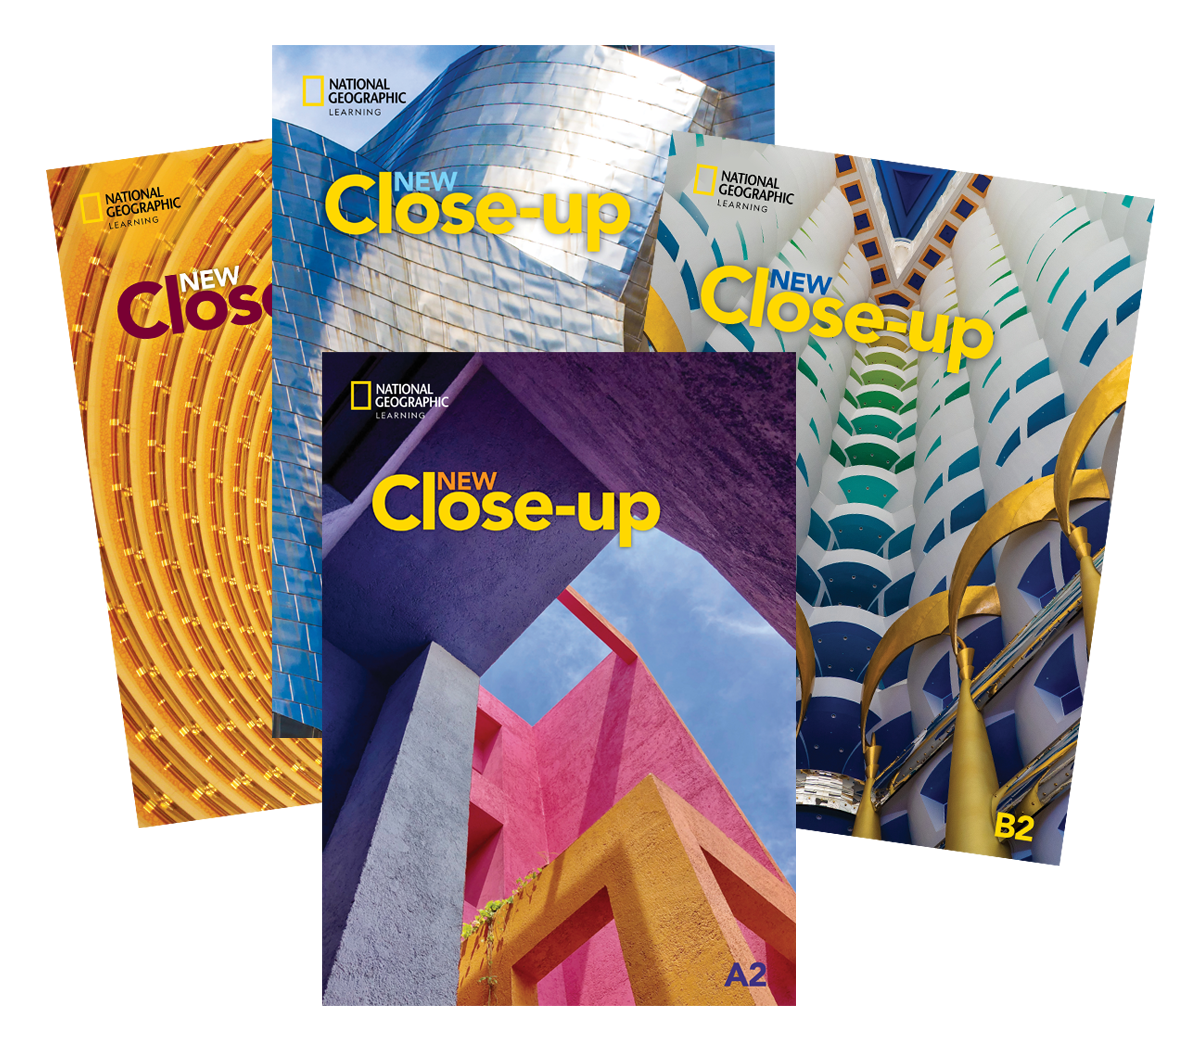 NEW CLOSE-UP, National Geographic Learning ELT Teens